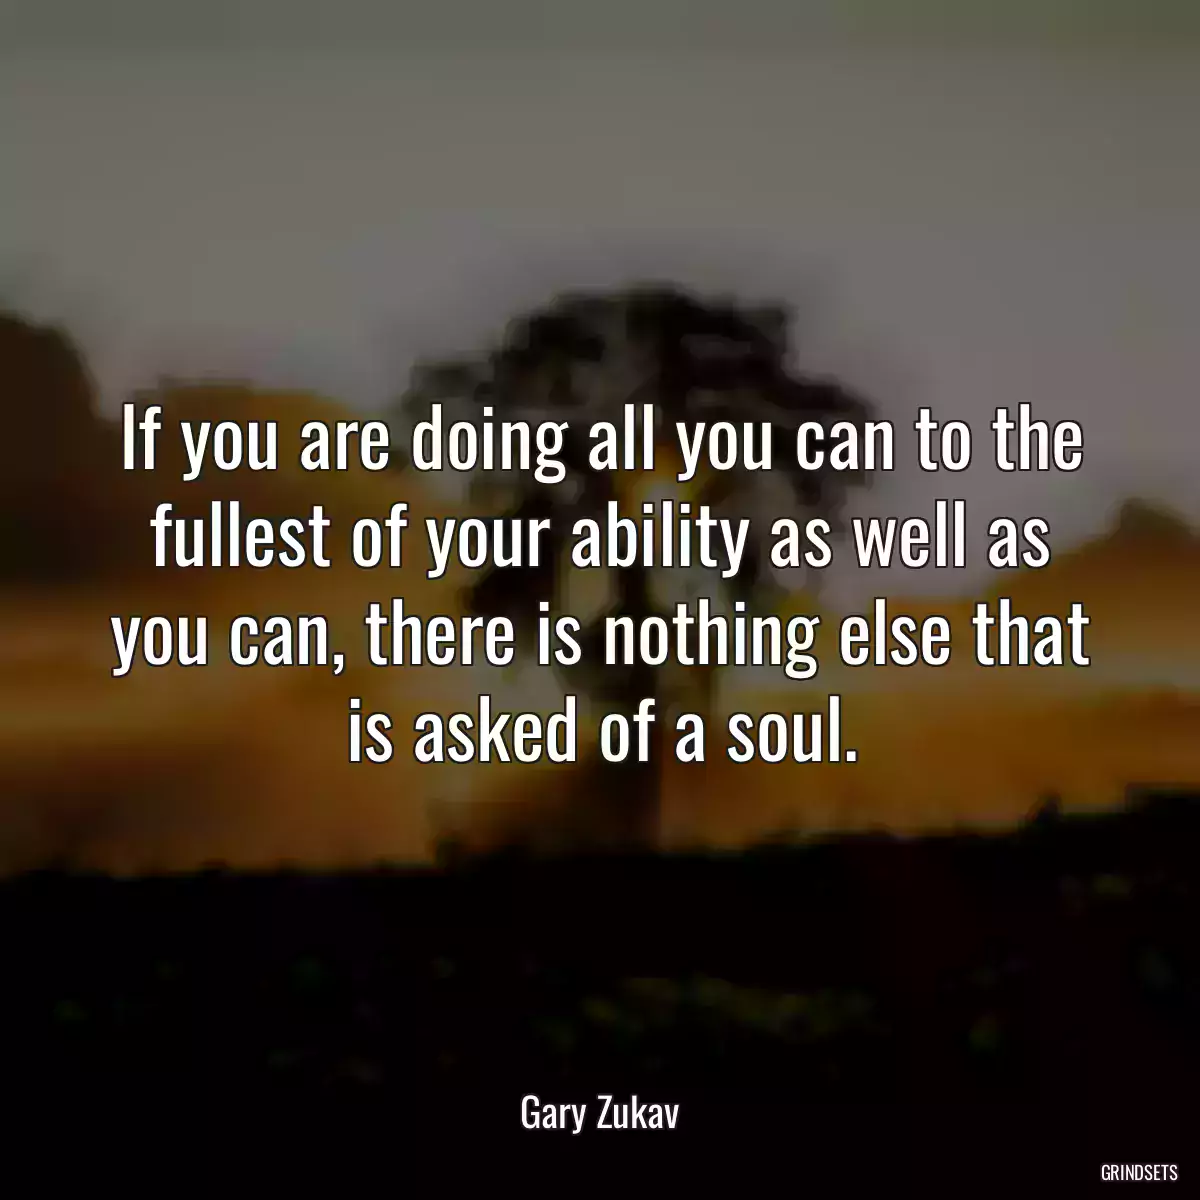 If you are doing all you can to the fullest of your ability as well as you can, there is nothing else that is asked of a soul.